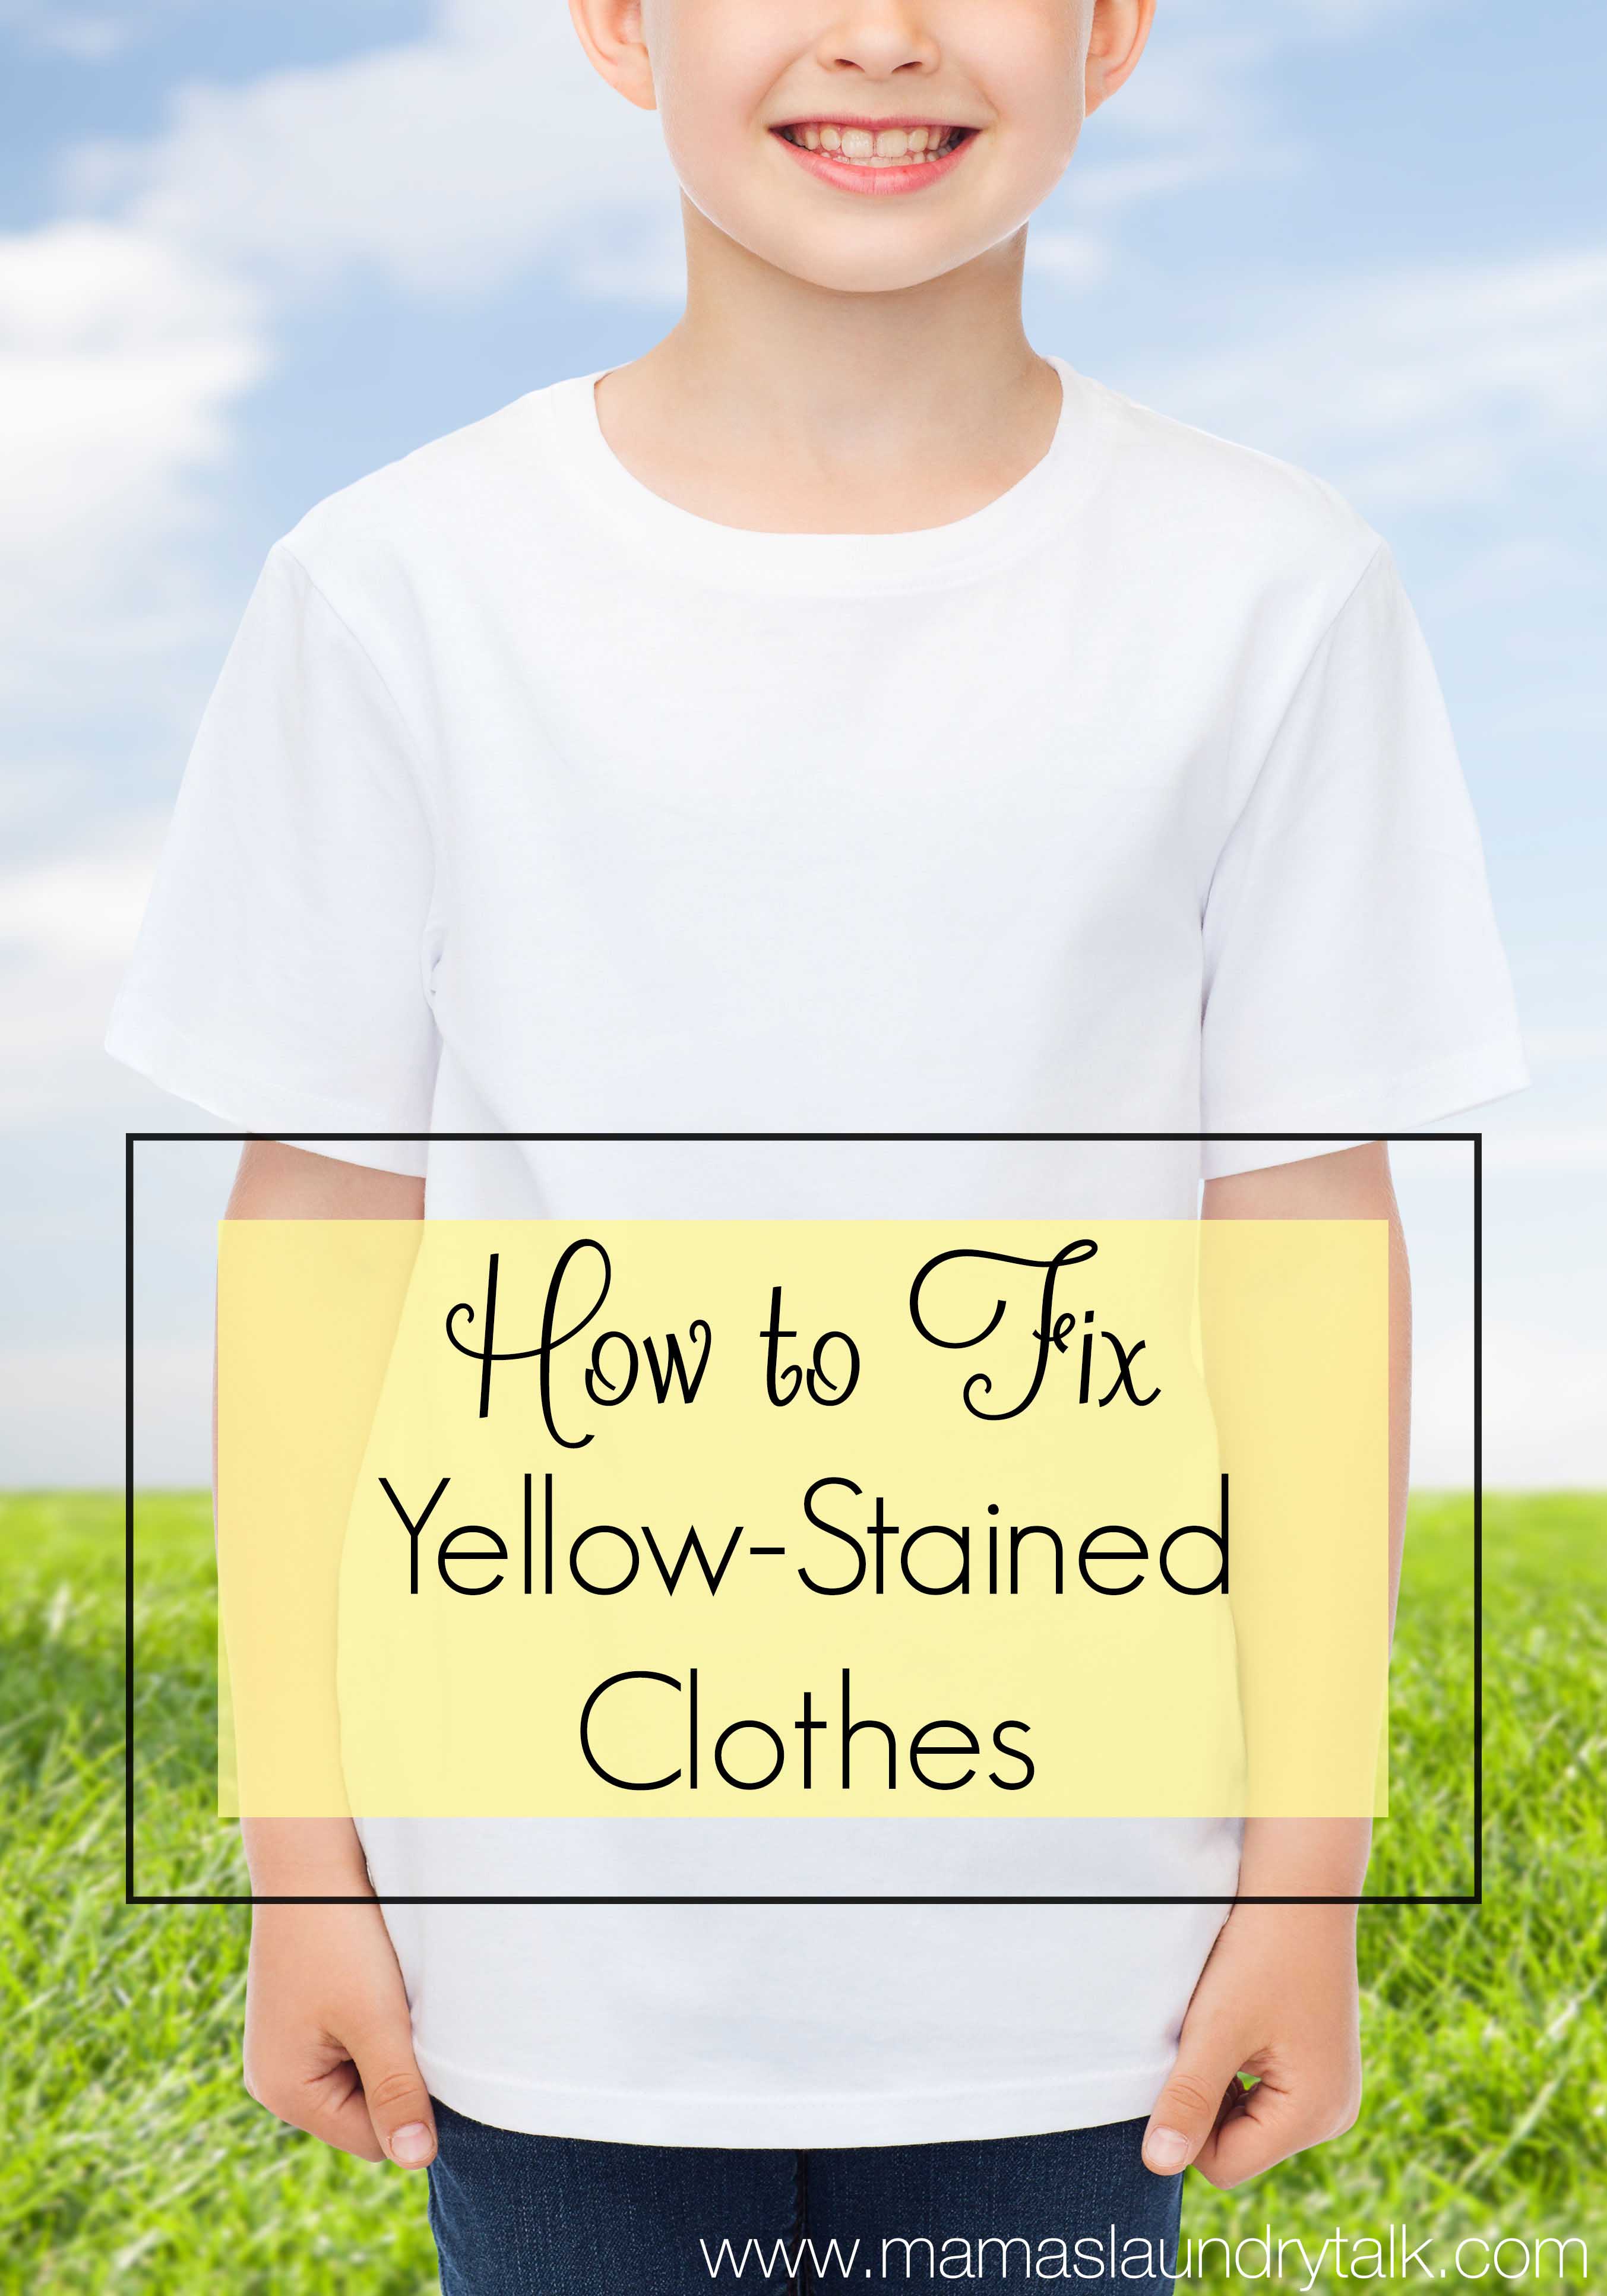 http://www.mamaslaundrytalk.com/wp-content/uploads/2010/08/How-to-Fix-Yellow-Stained-Clothes.jpg